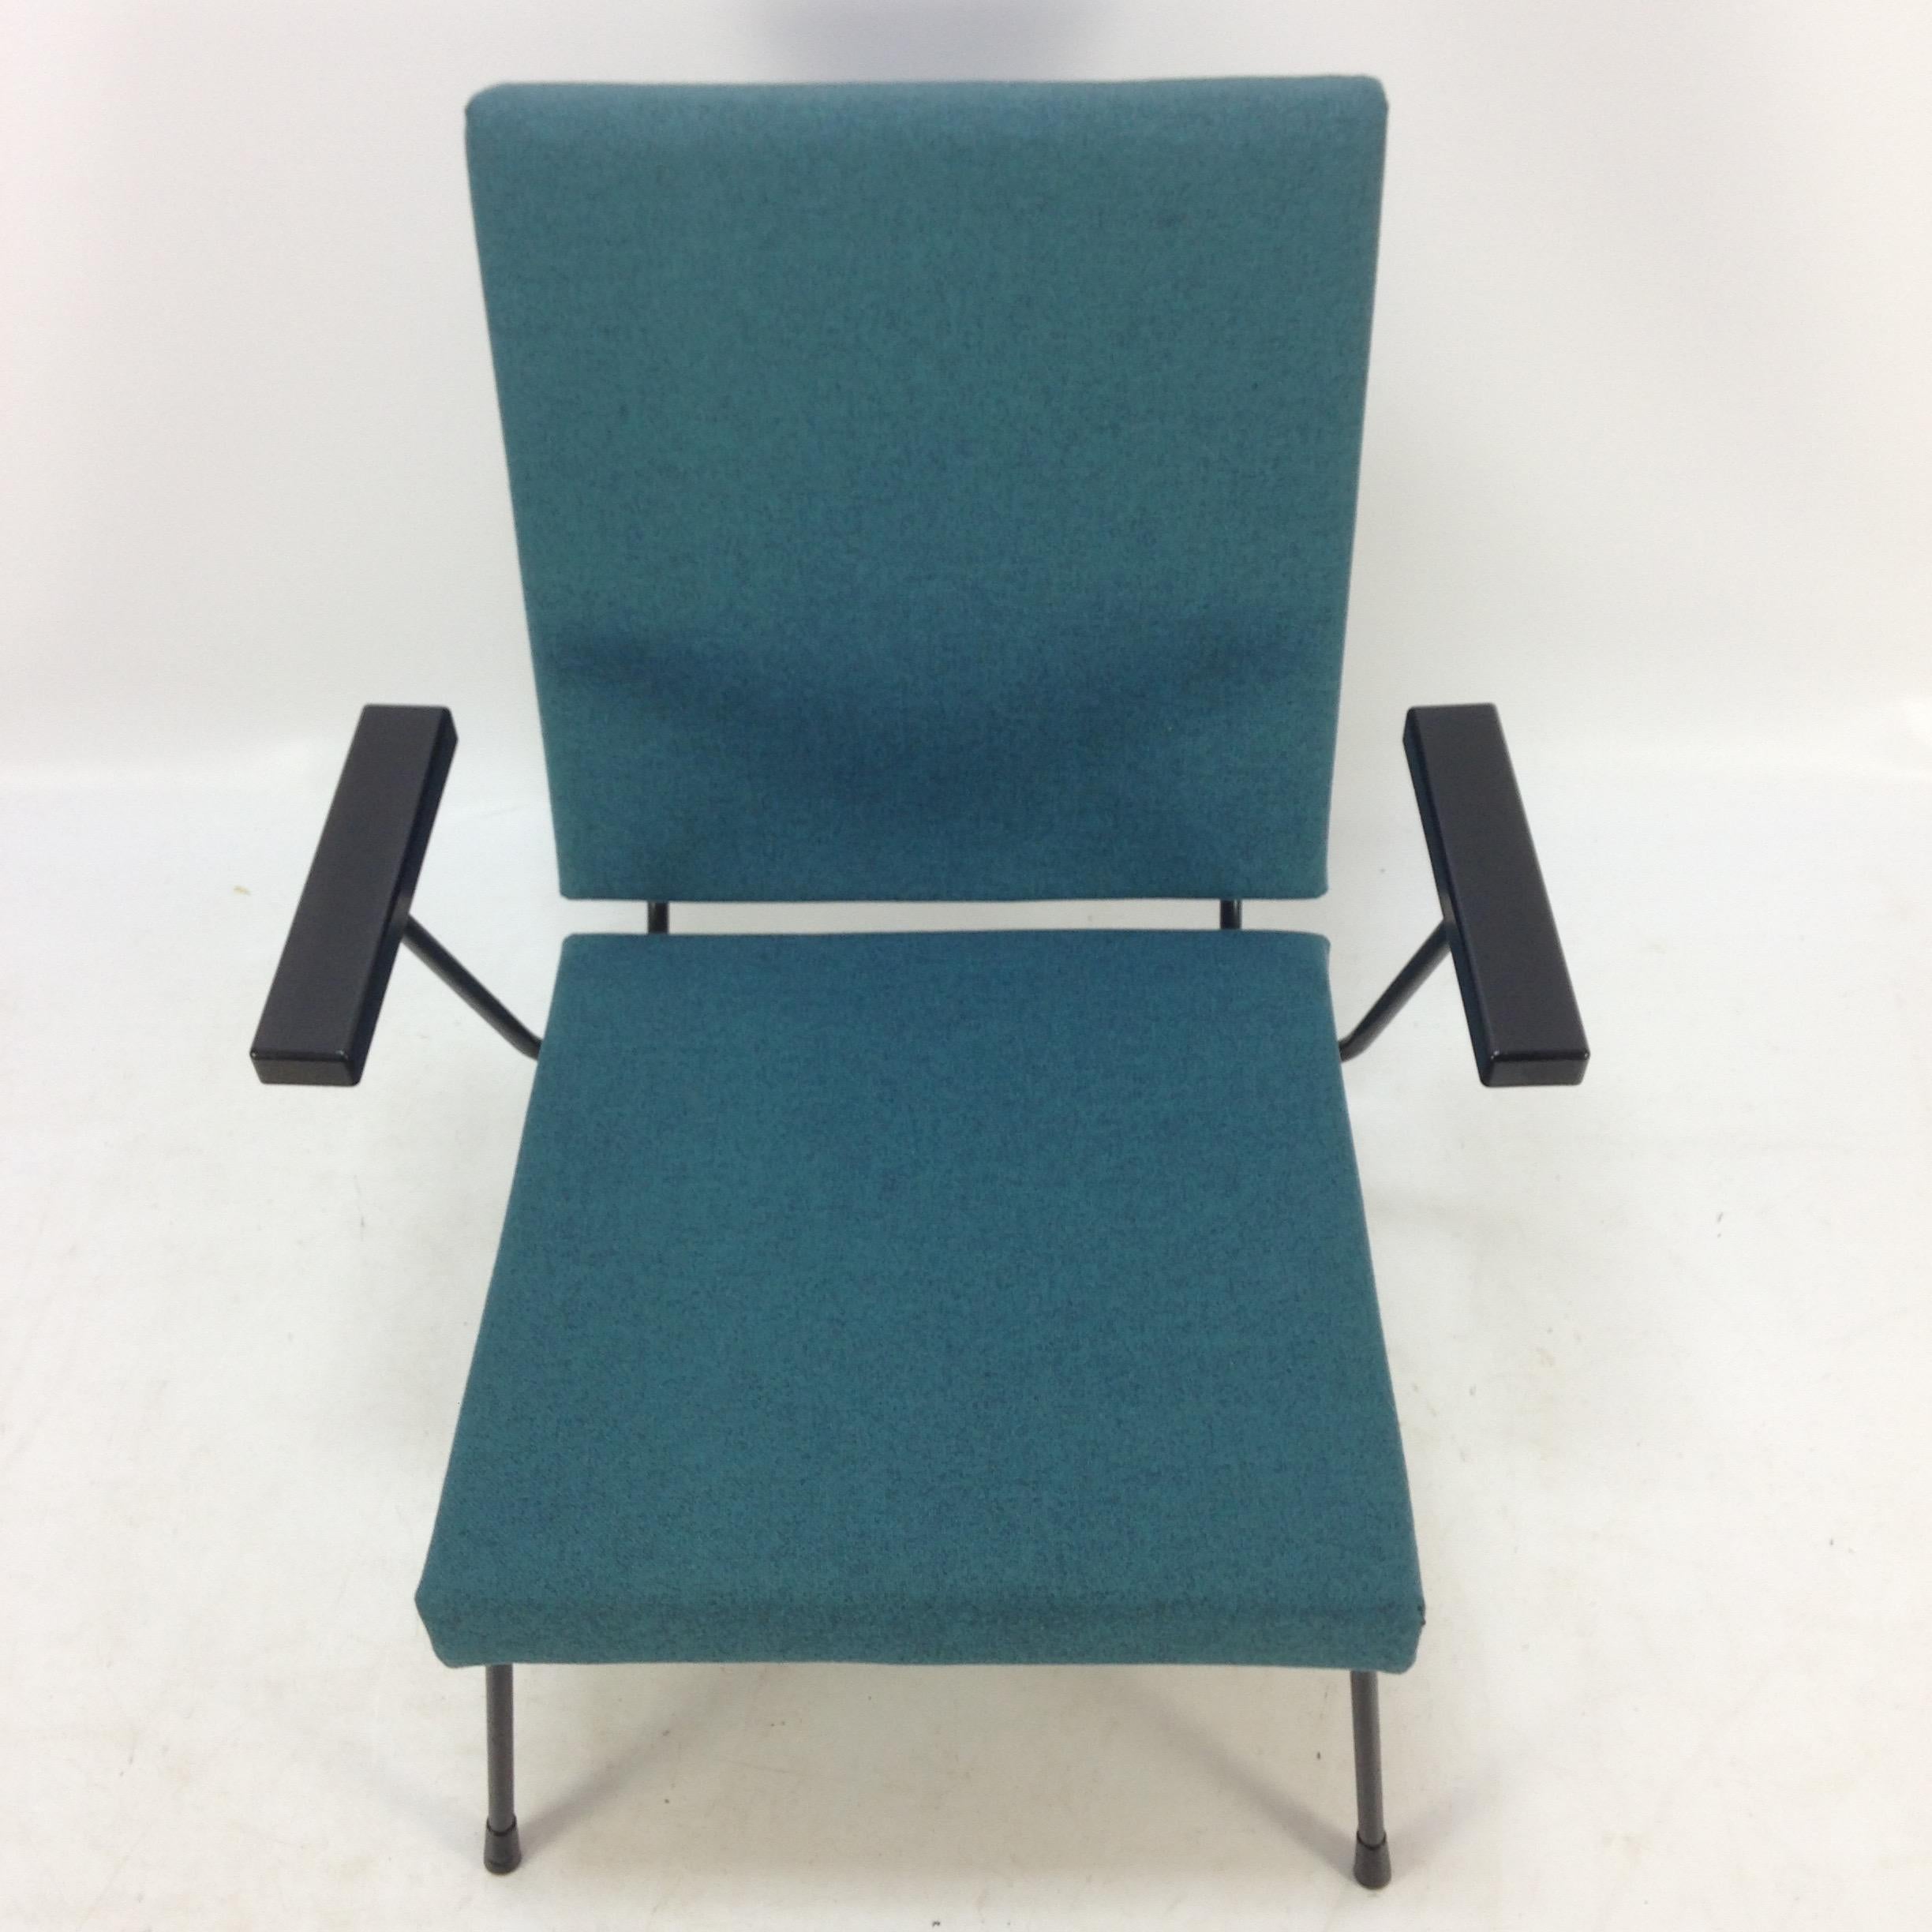 Wim Rietveld 1407 Lounge Chair for Gispen, 1950’s In Good Condition For Sale In Oud Beijerland, NL